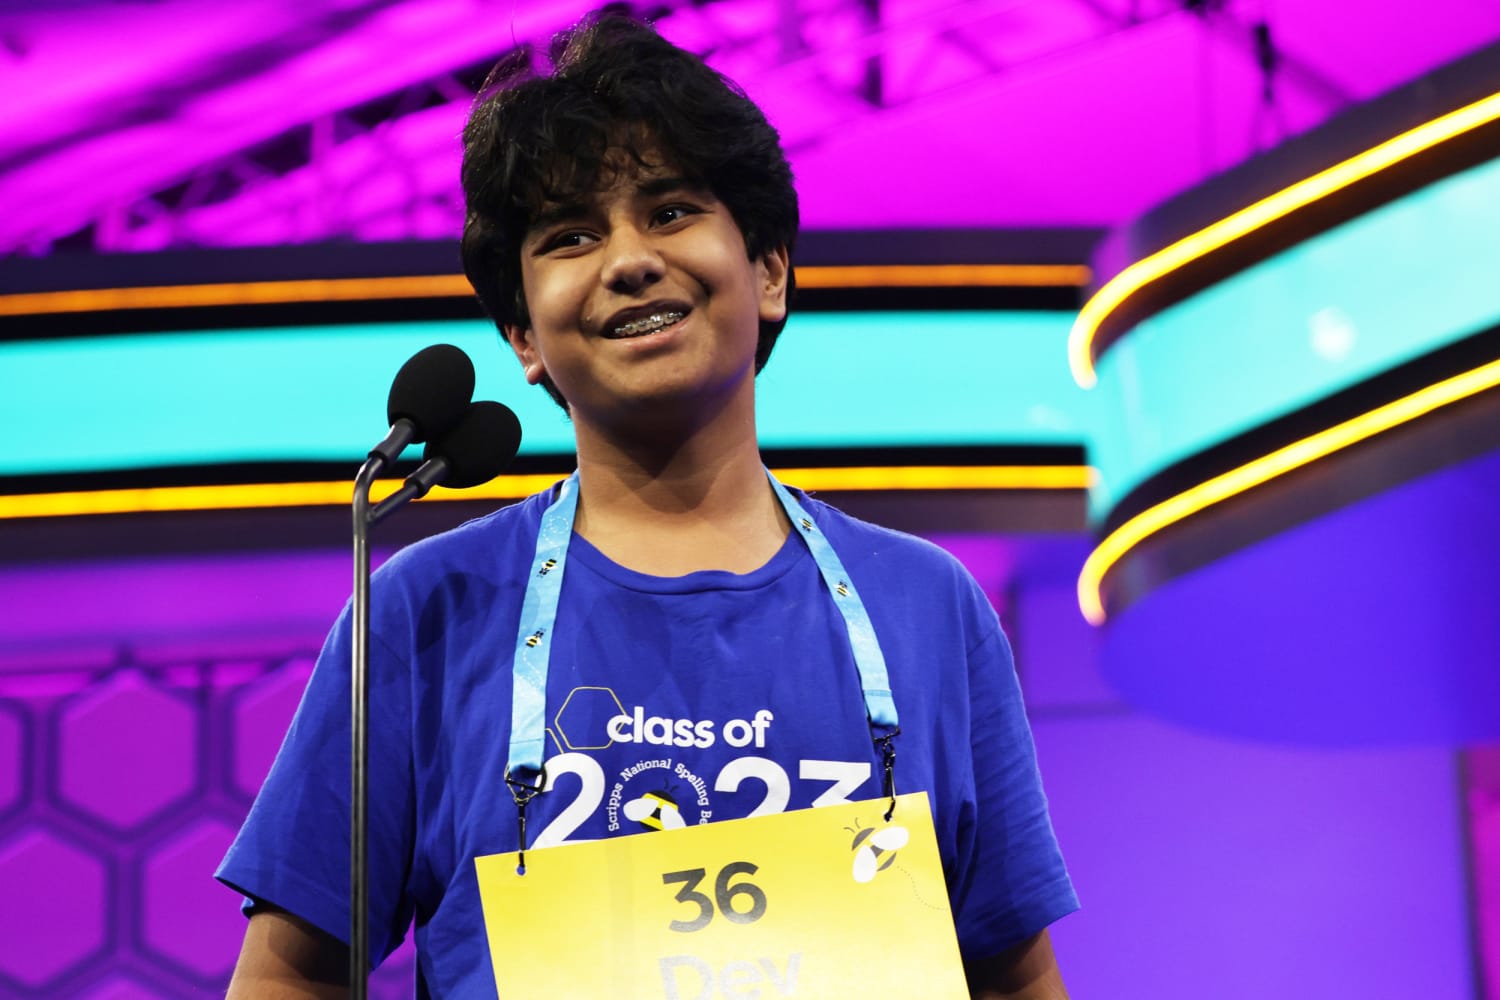 Meet the 14-year-old who won the Scripps National Spelling Bee with ‘psammophile’